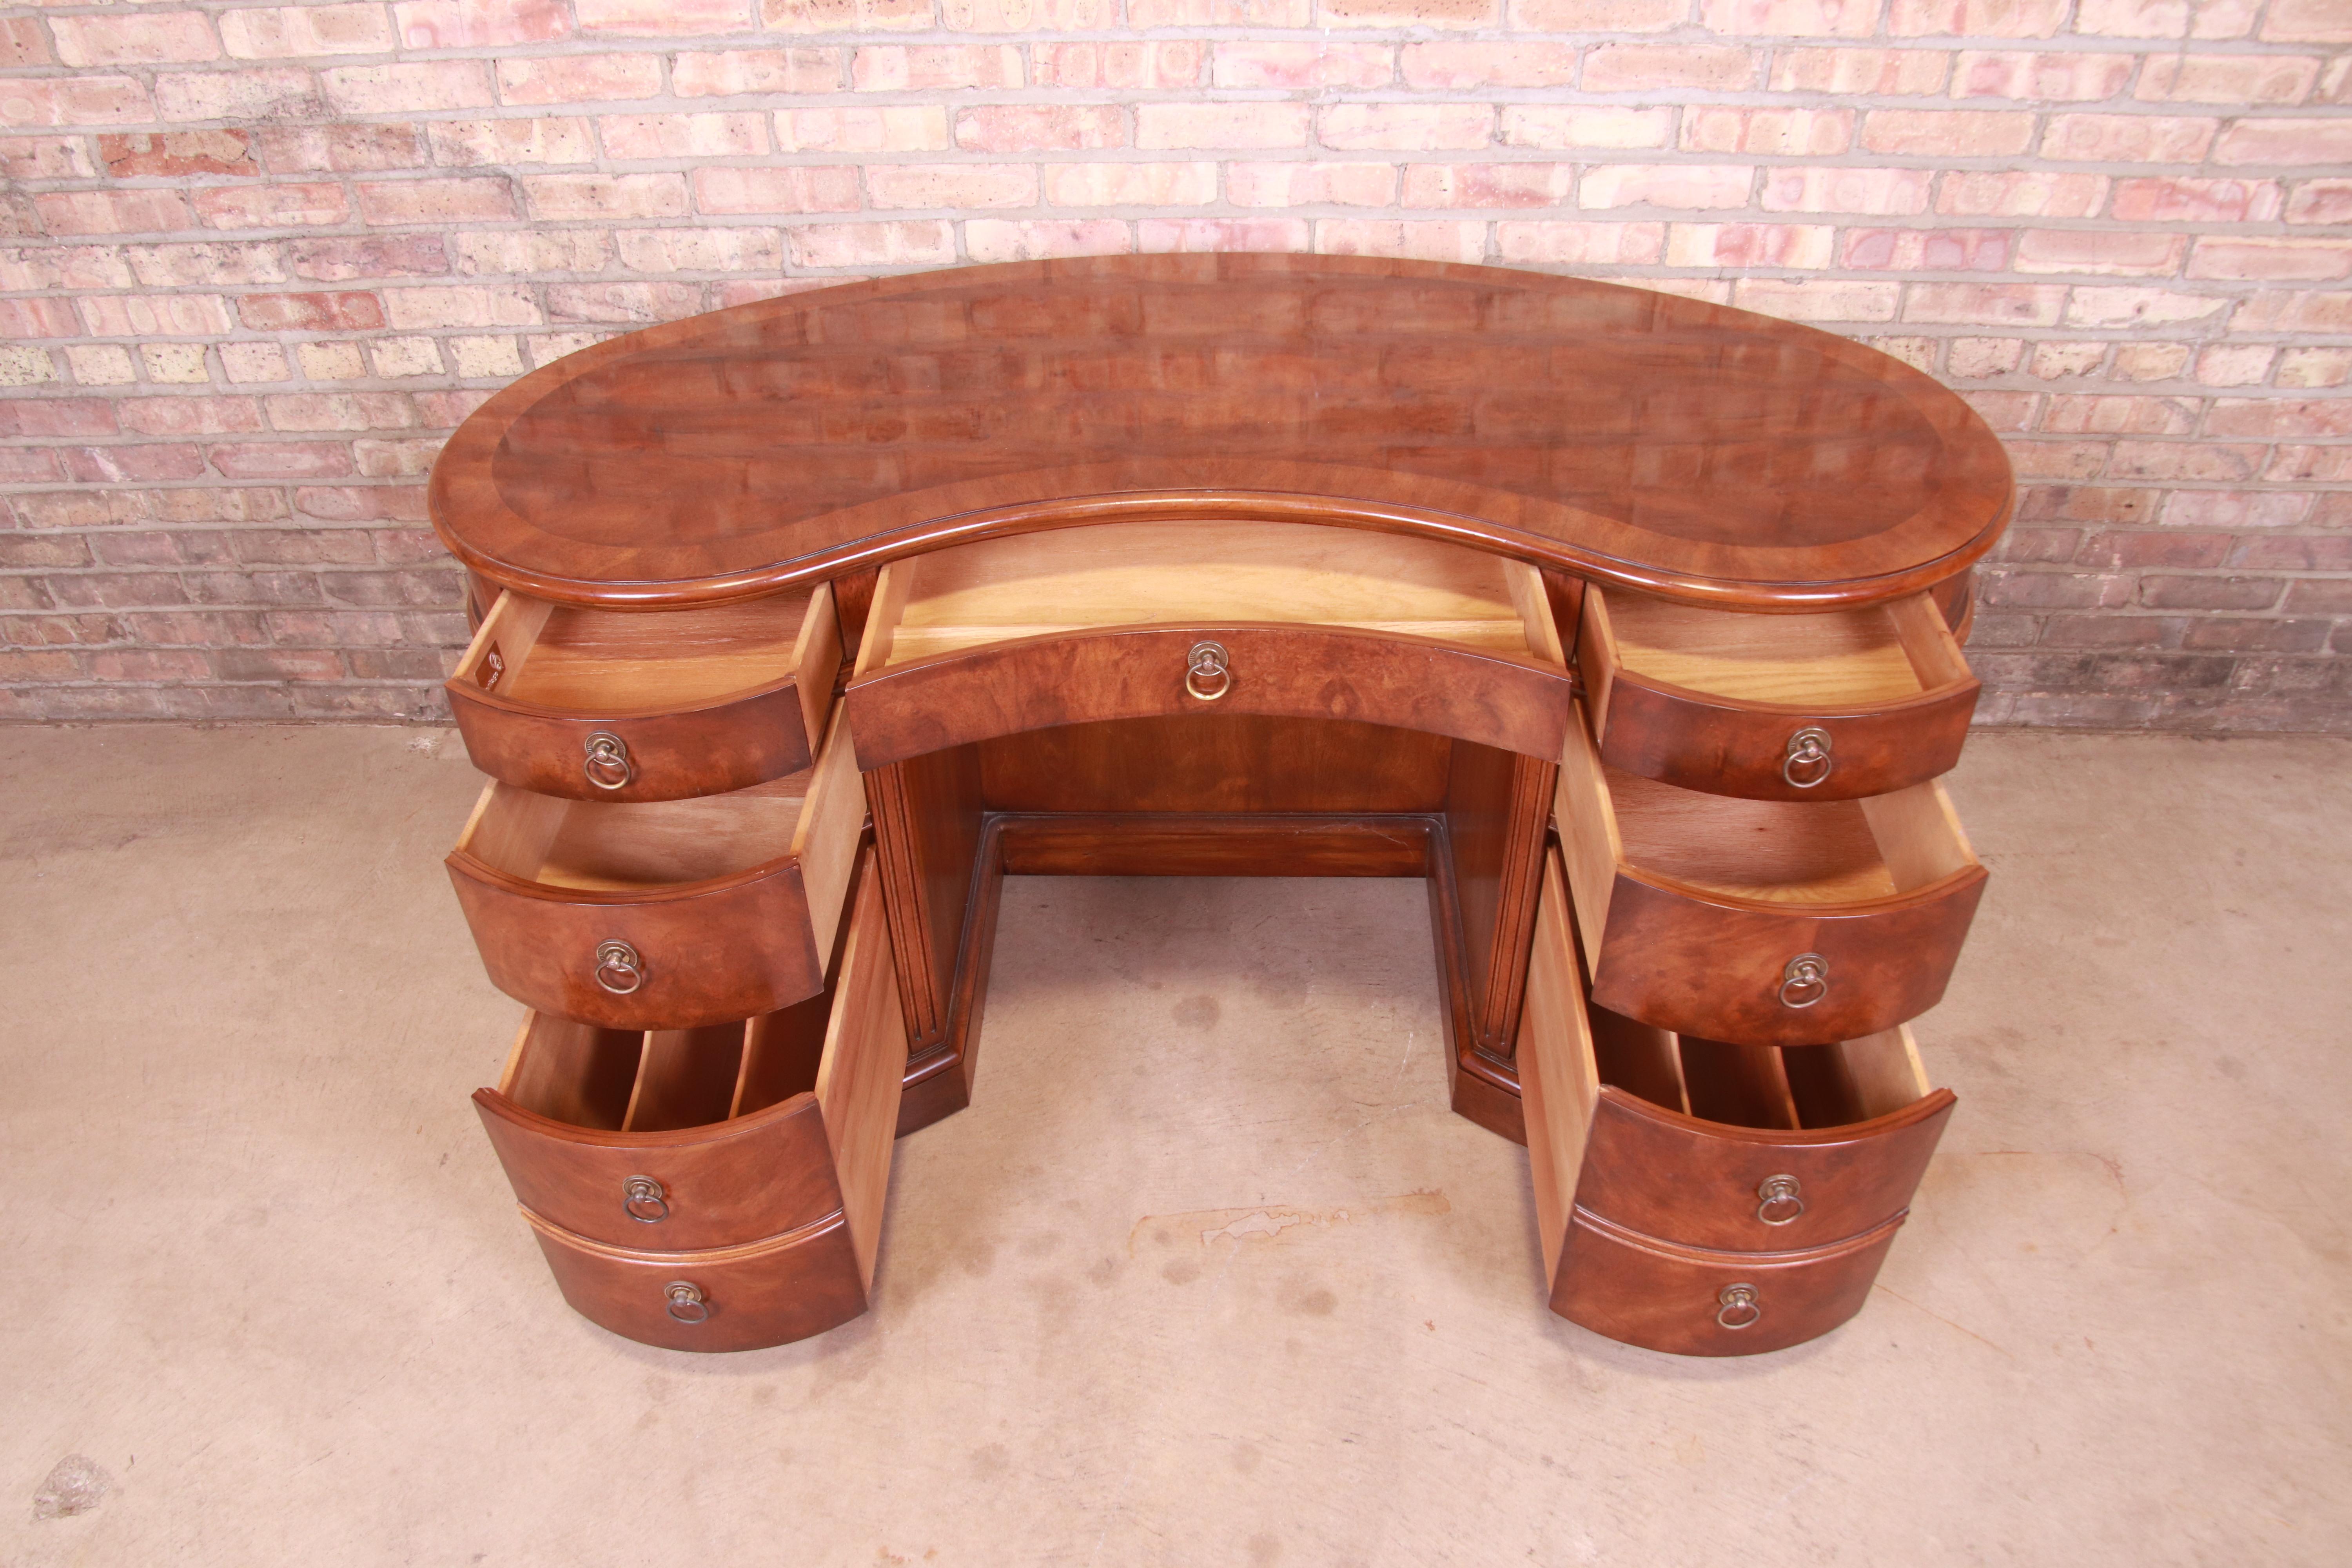 20th Century Drexel Heritage Mahogany and Burl Wood Kidney Shaped Desk with Bookcase